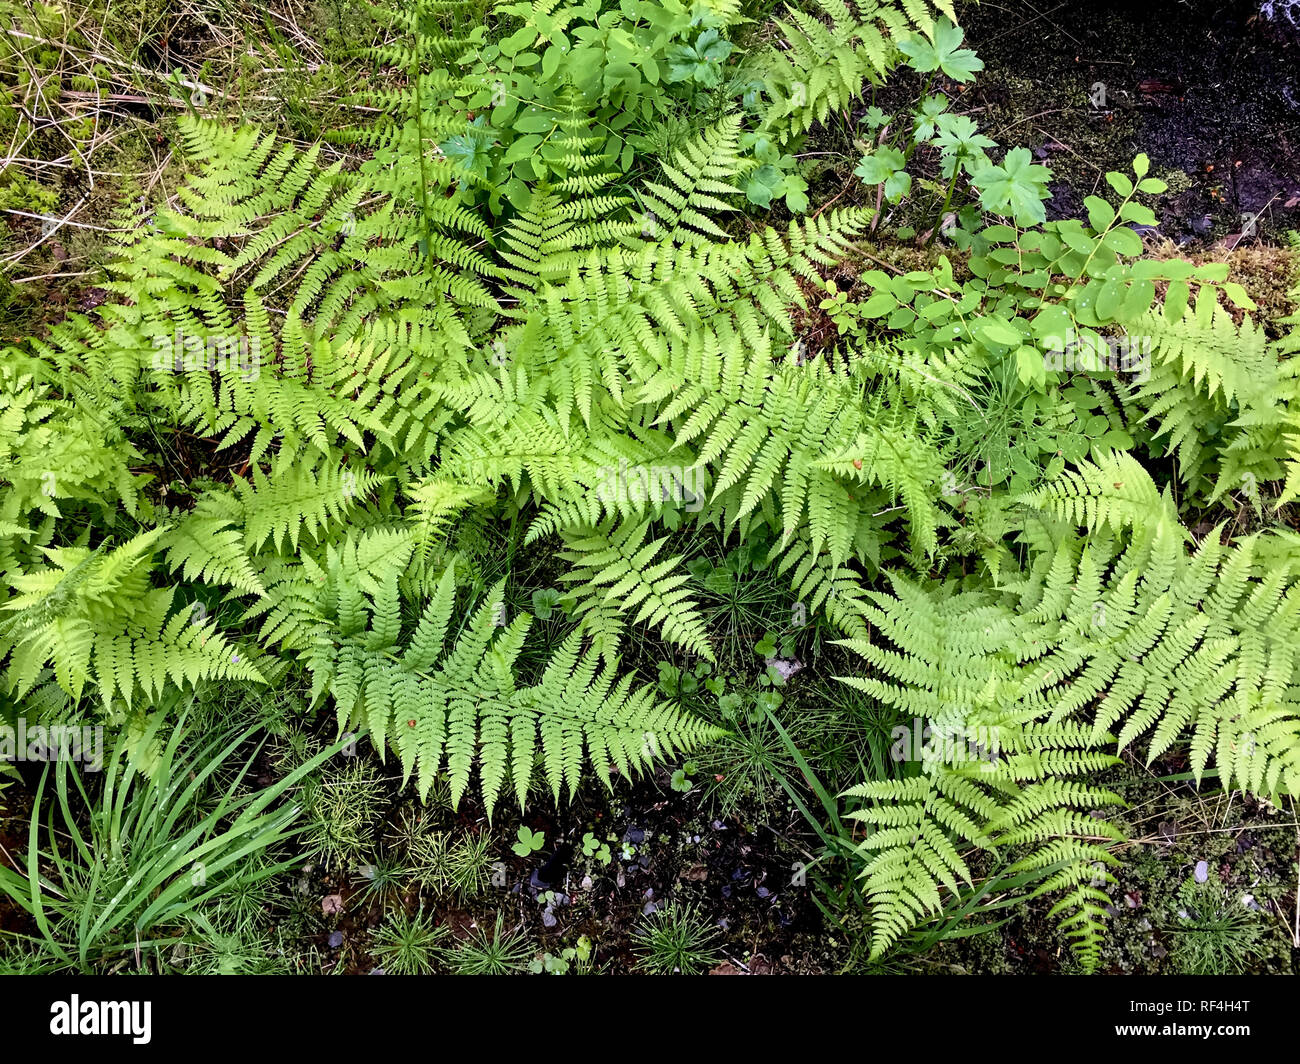 Close-up of native plants ferns on the forest floor at Bartlett Cove in Glacier Bay National Park, Alaska. Lady fern (Athyrium felix-femina) is common. Stock Photo